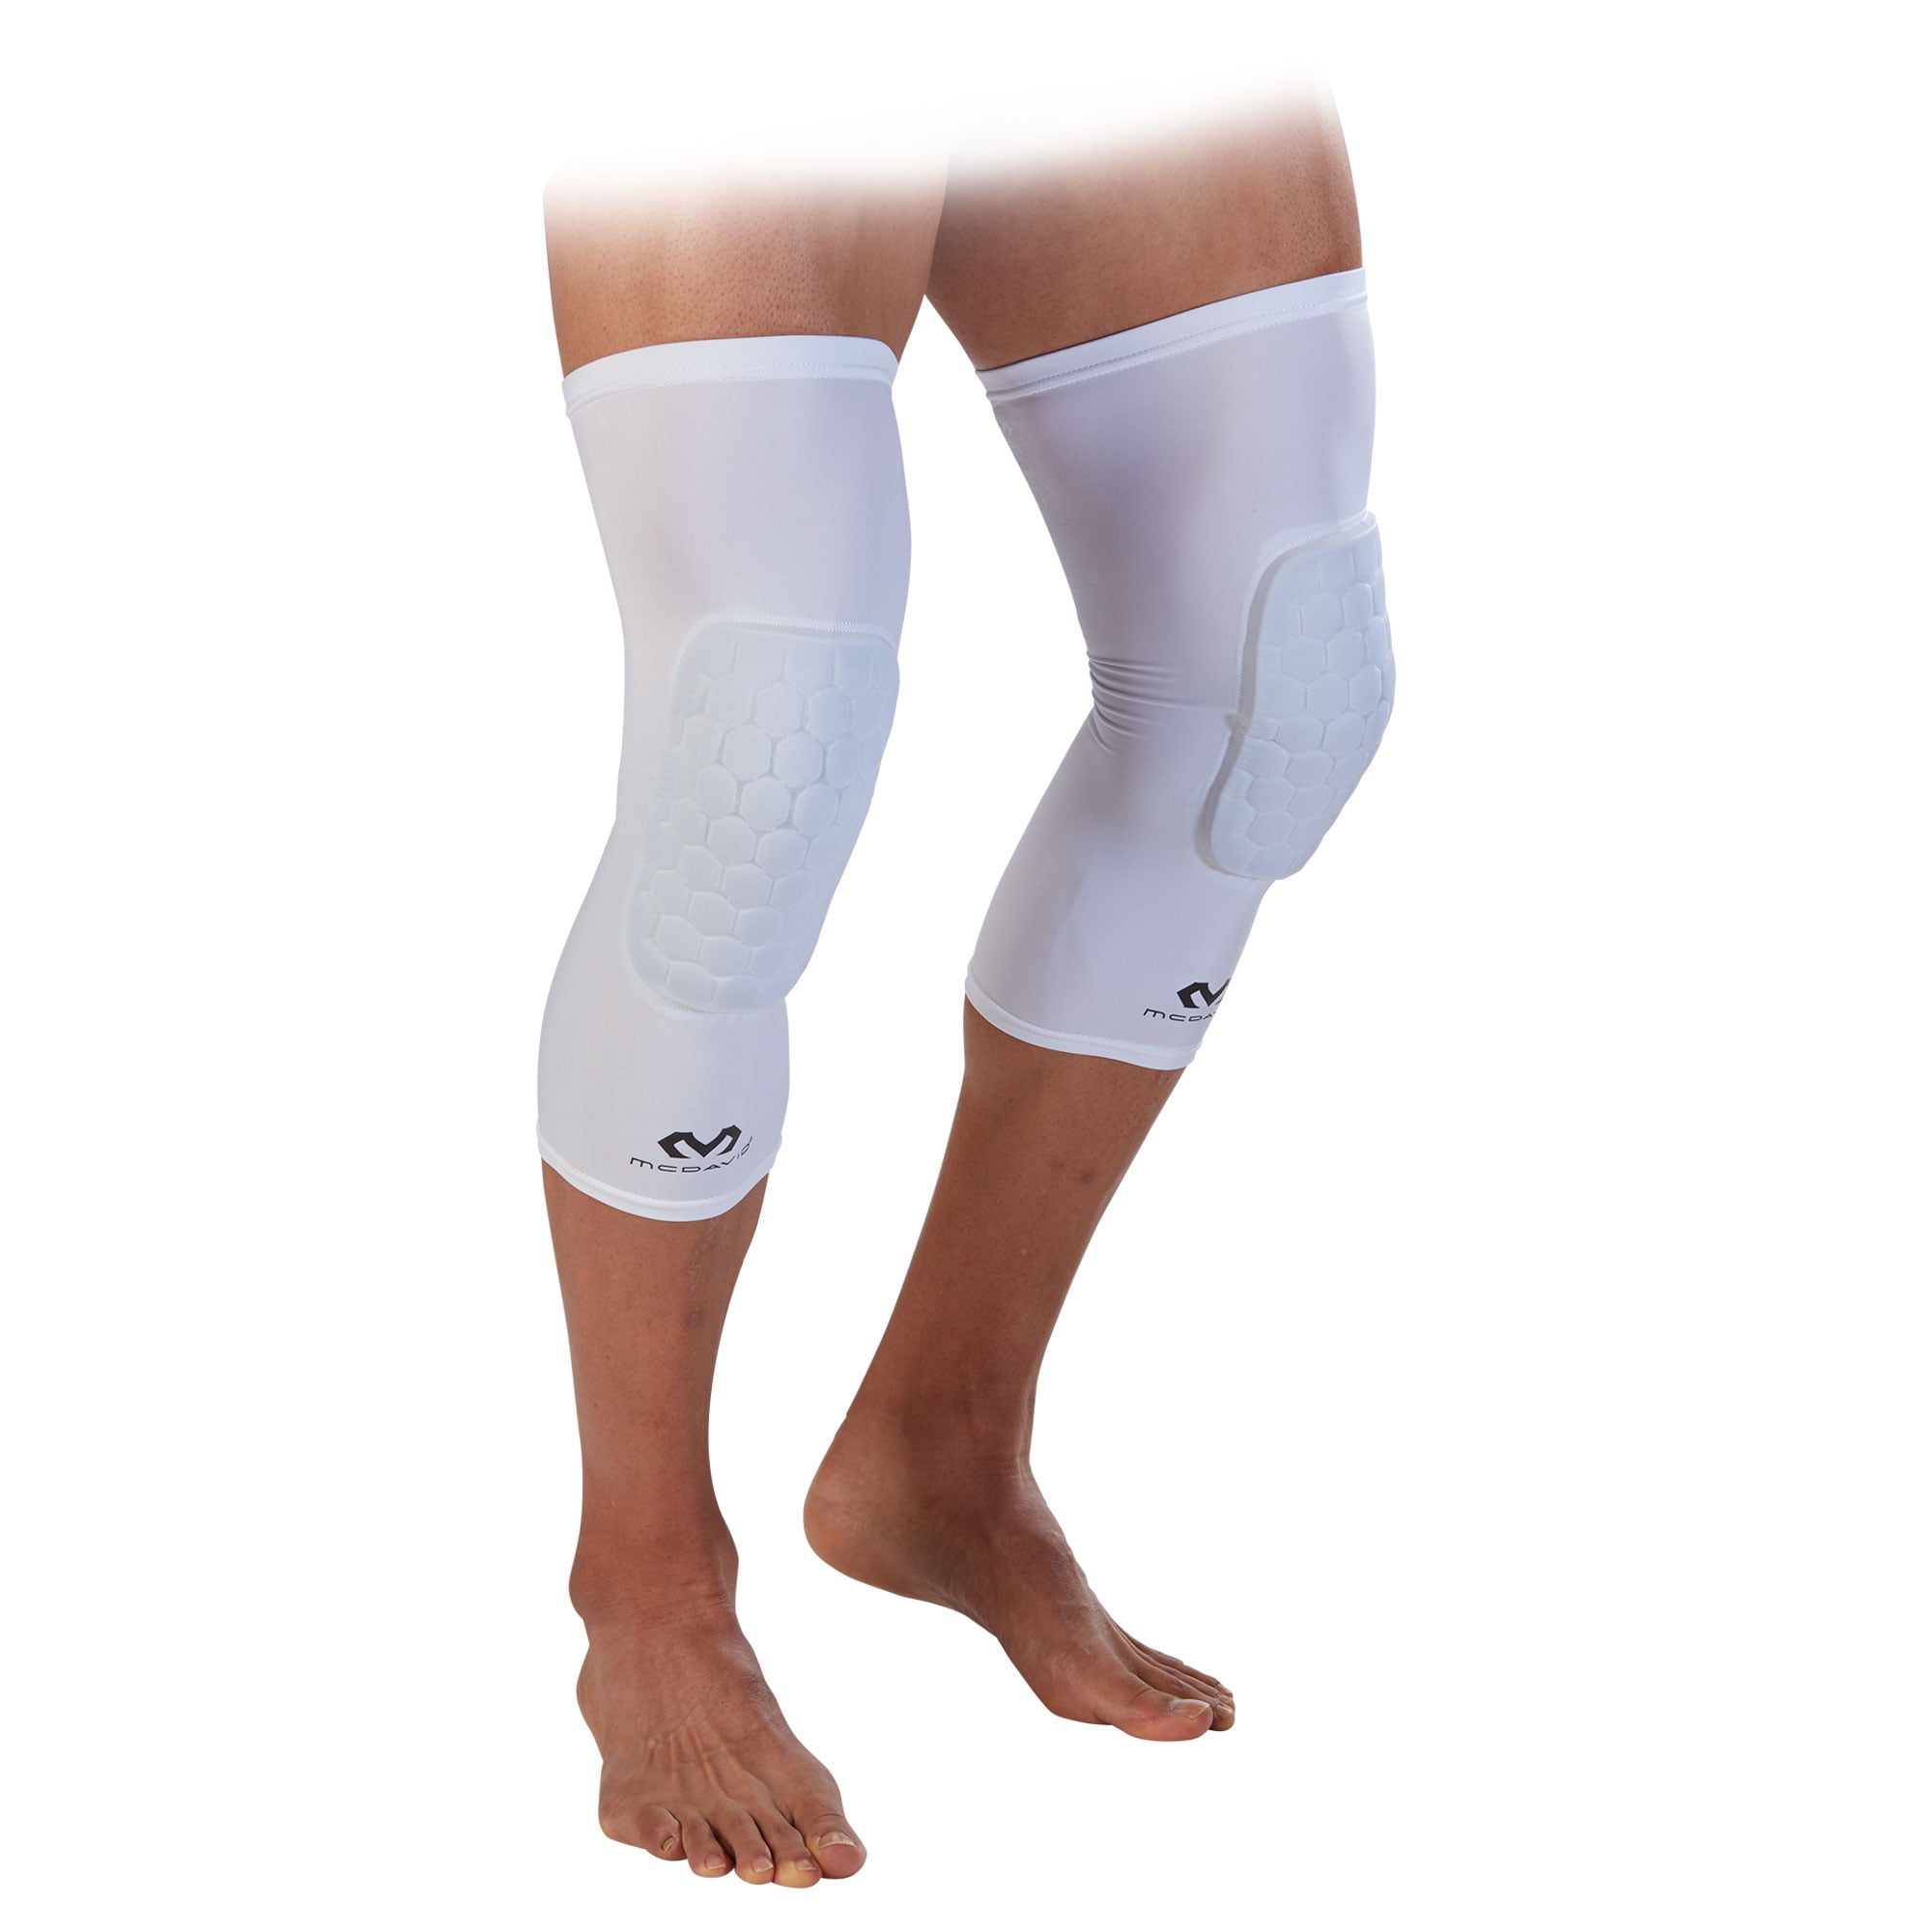 McDavid Sports Hex Tech Basketball Knee Sleeve Pair, White,  Large/Extra-Large